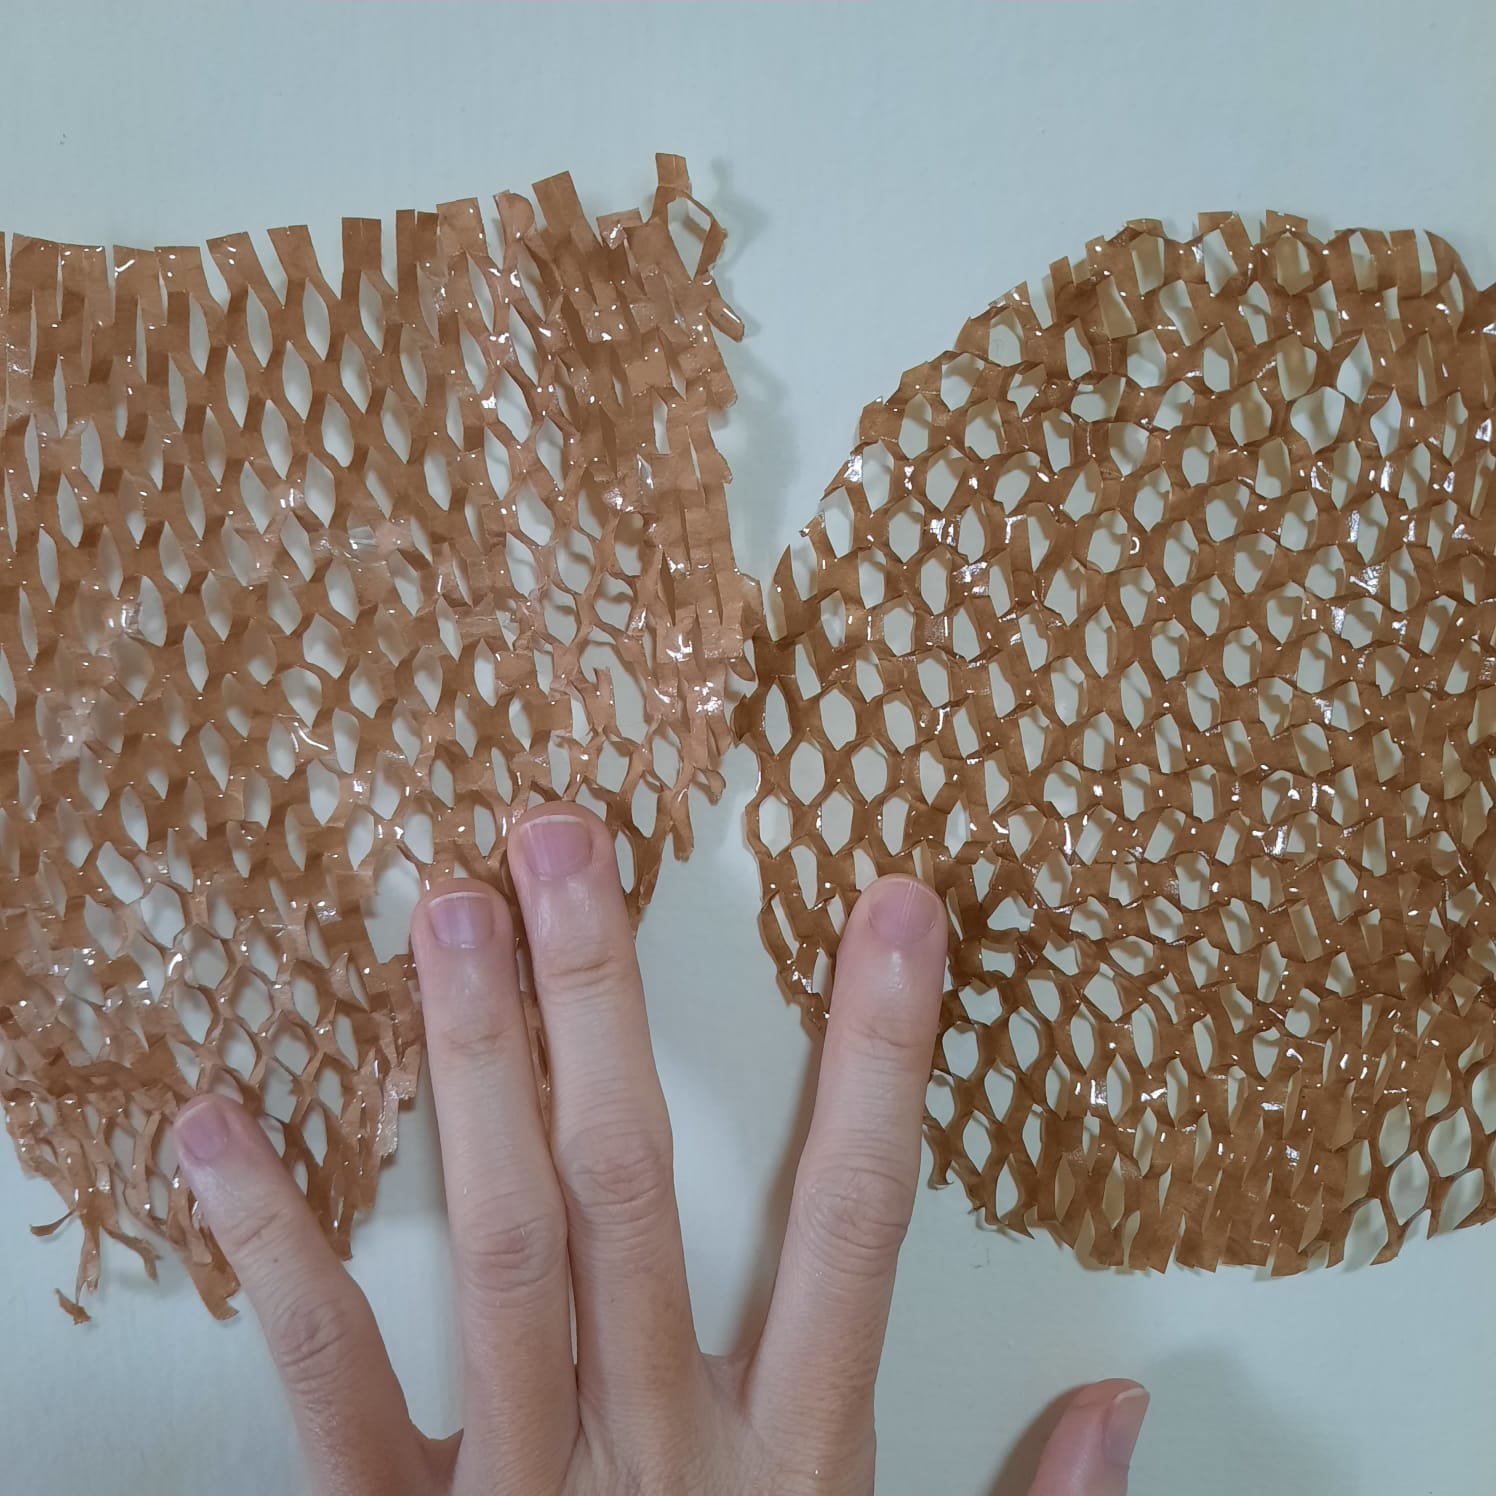 Treatment of paper before applying resin (L) and no treatment (R)